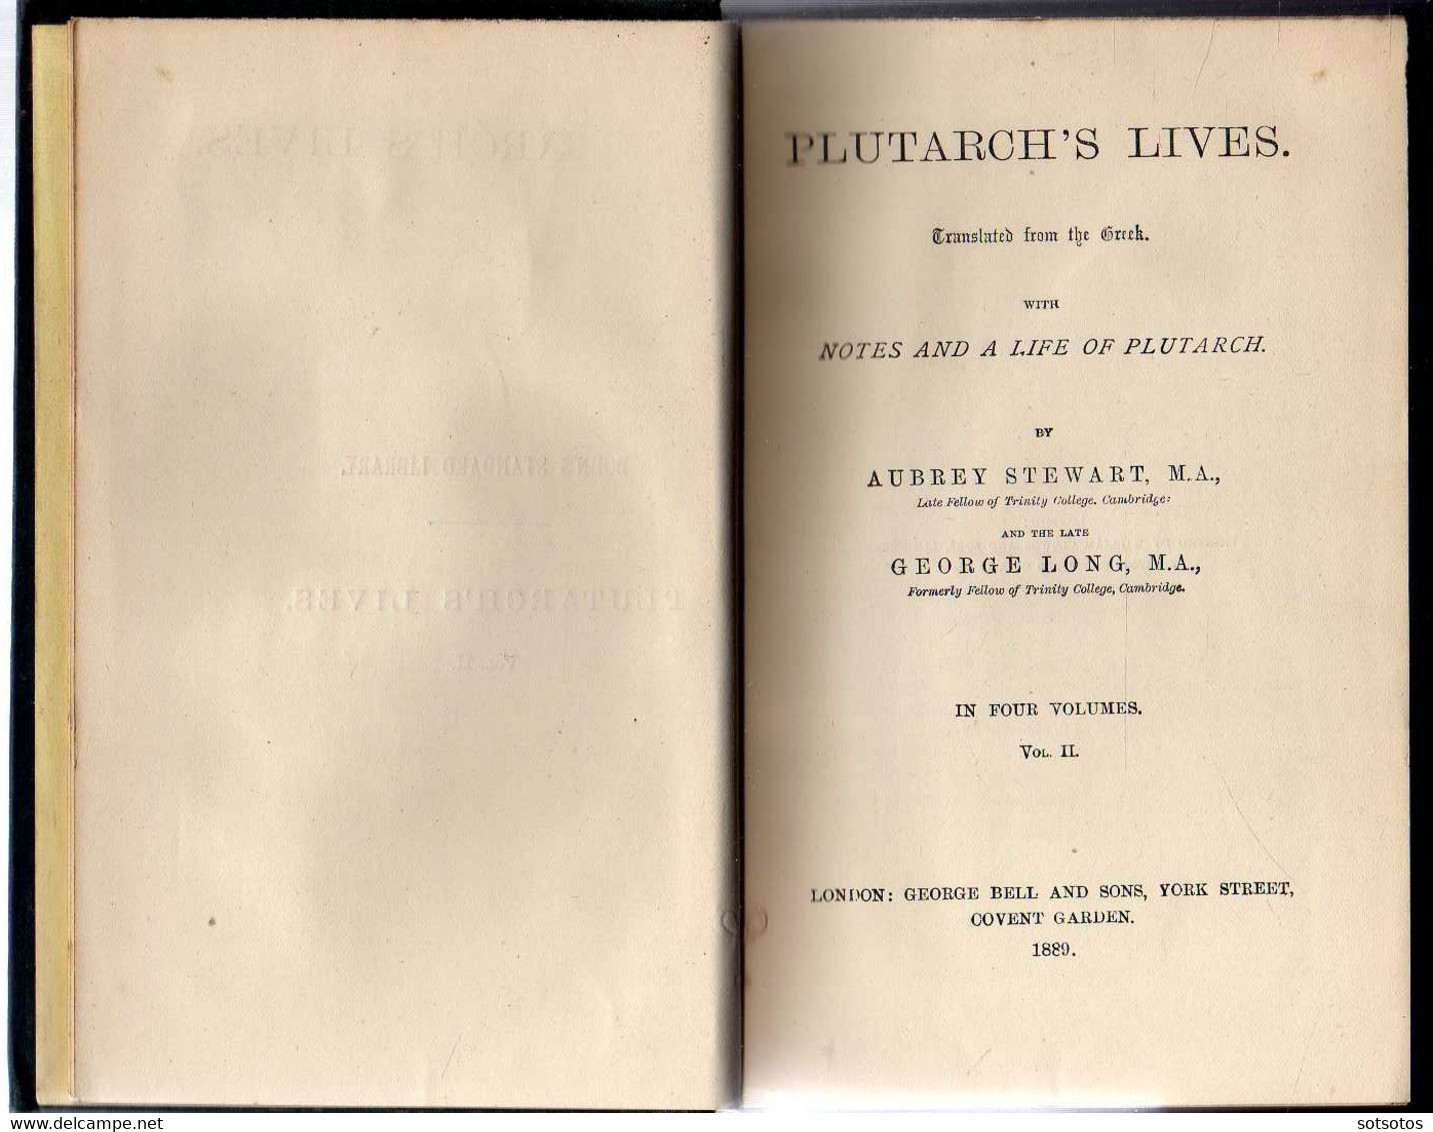 Plutarch's Lives  translated from the Greek with Notes and a Life of Plutarch by Aubrey Stewart and the Late George Long